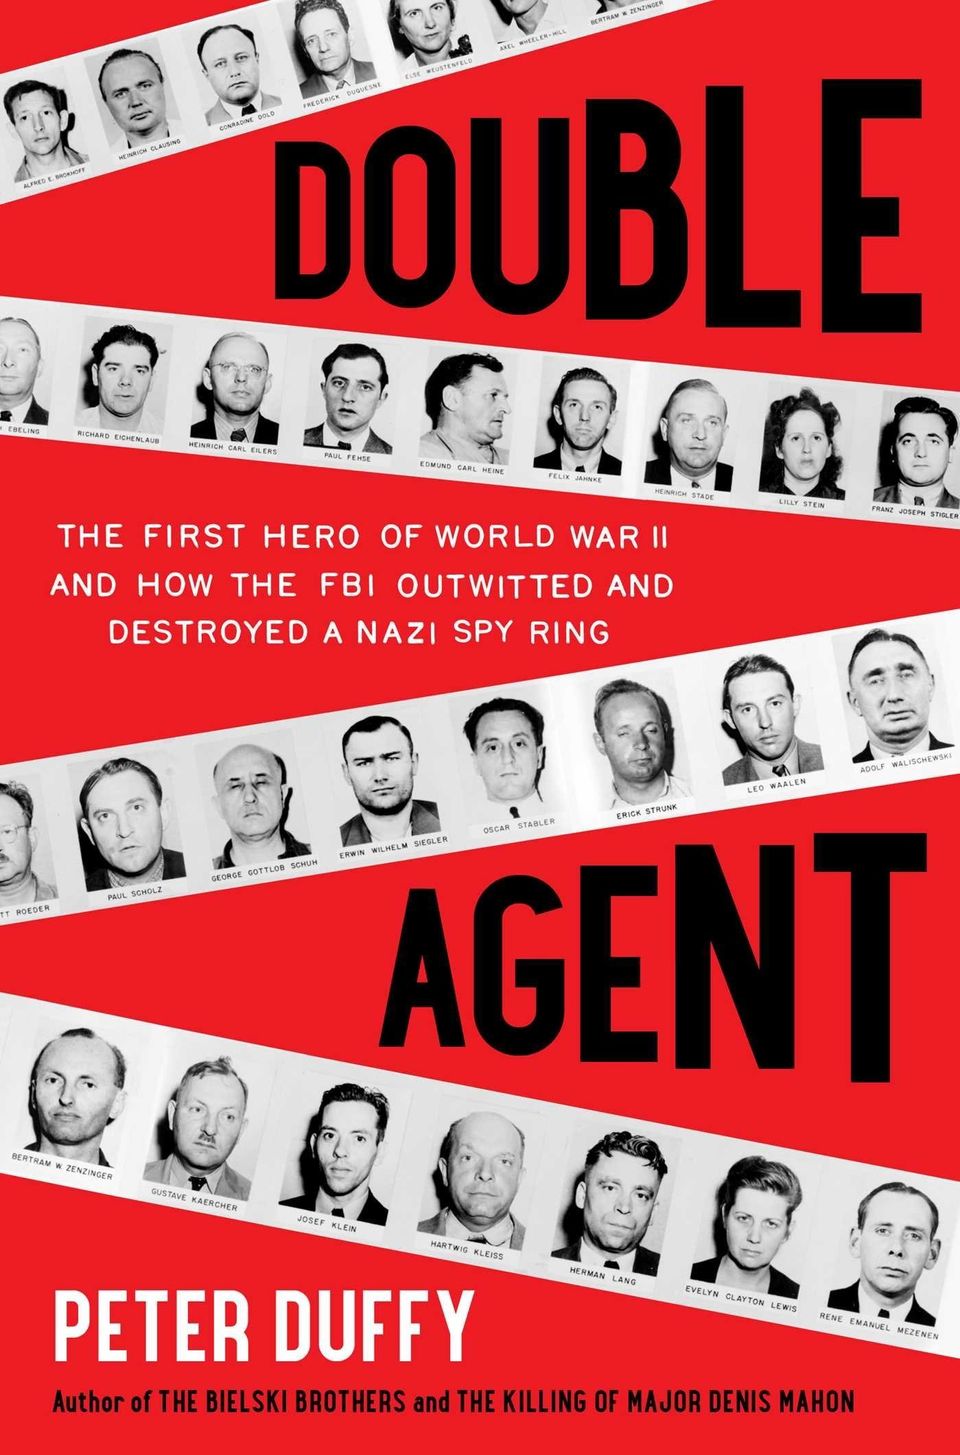 'DOUBLE AGENT: THE FIRST HERO OF WORLD WAR II AND HOW THE FBI OUTWITTED AND DESTROYED A NAZI SPY RING' by Peter Duffy